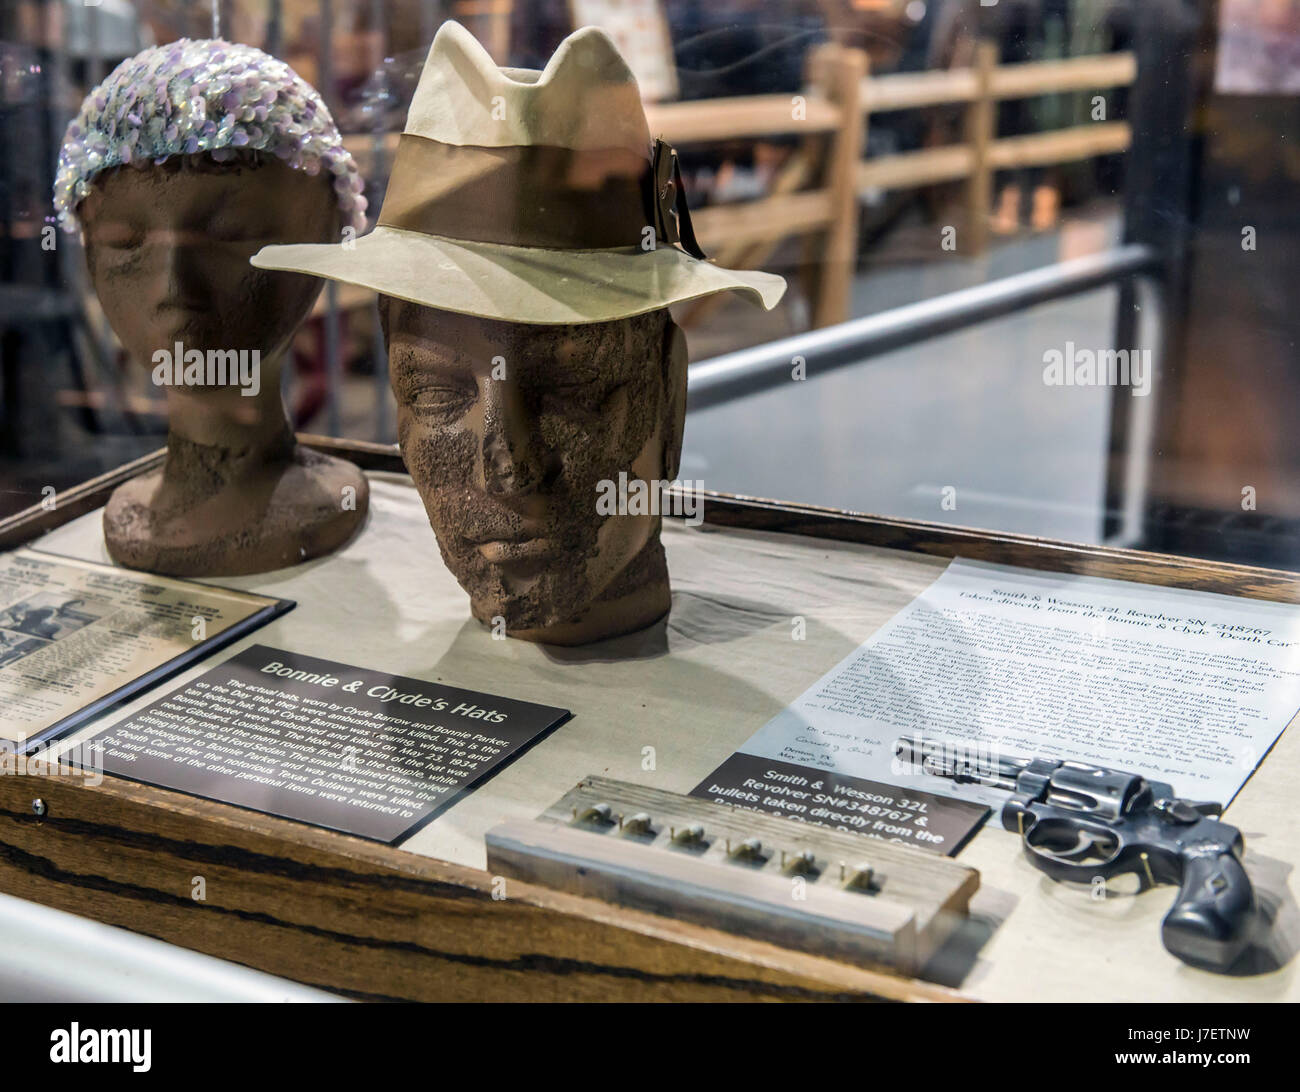 Roscoe, Illinois, USA. 24th May, 2017. The hats worn by famed outlaws Bonnie Parker and Clyde Barrow on the day they were ambushed and killed on May 23, 1934 are displayed at the Historic Auto Attractions Museum. The museum's holdings include the world's largest collection of presidential and world leaders' automobiles, and 36,000 square feet worth of displays of cultural artifacts and historical oddities from the 20th Century. Credit: Brian Cahn/ZUMA Wire/Alamy Live News Stock Photo